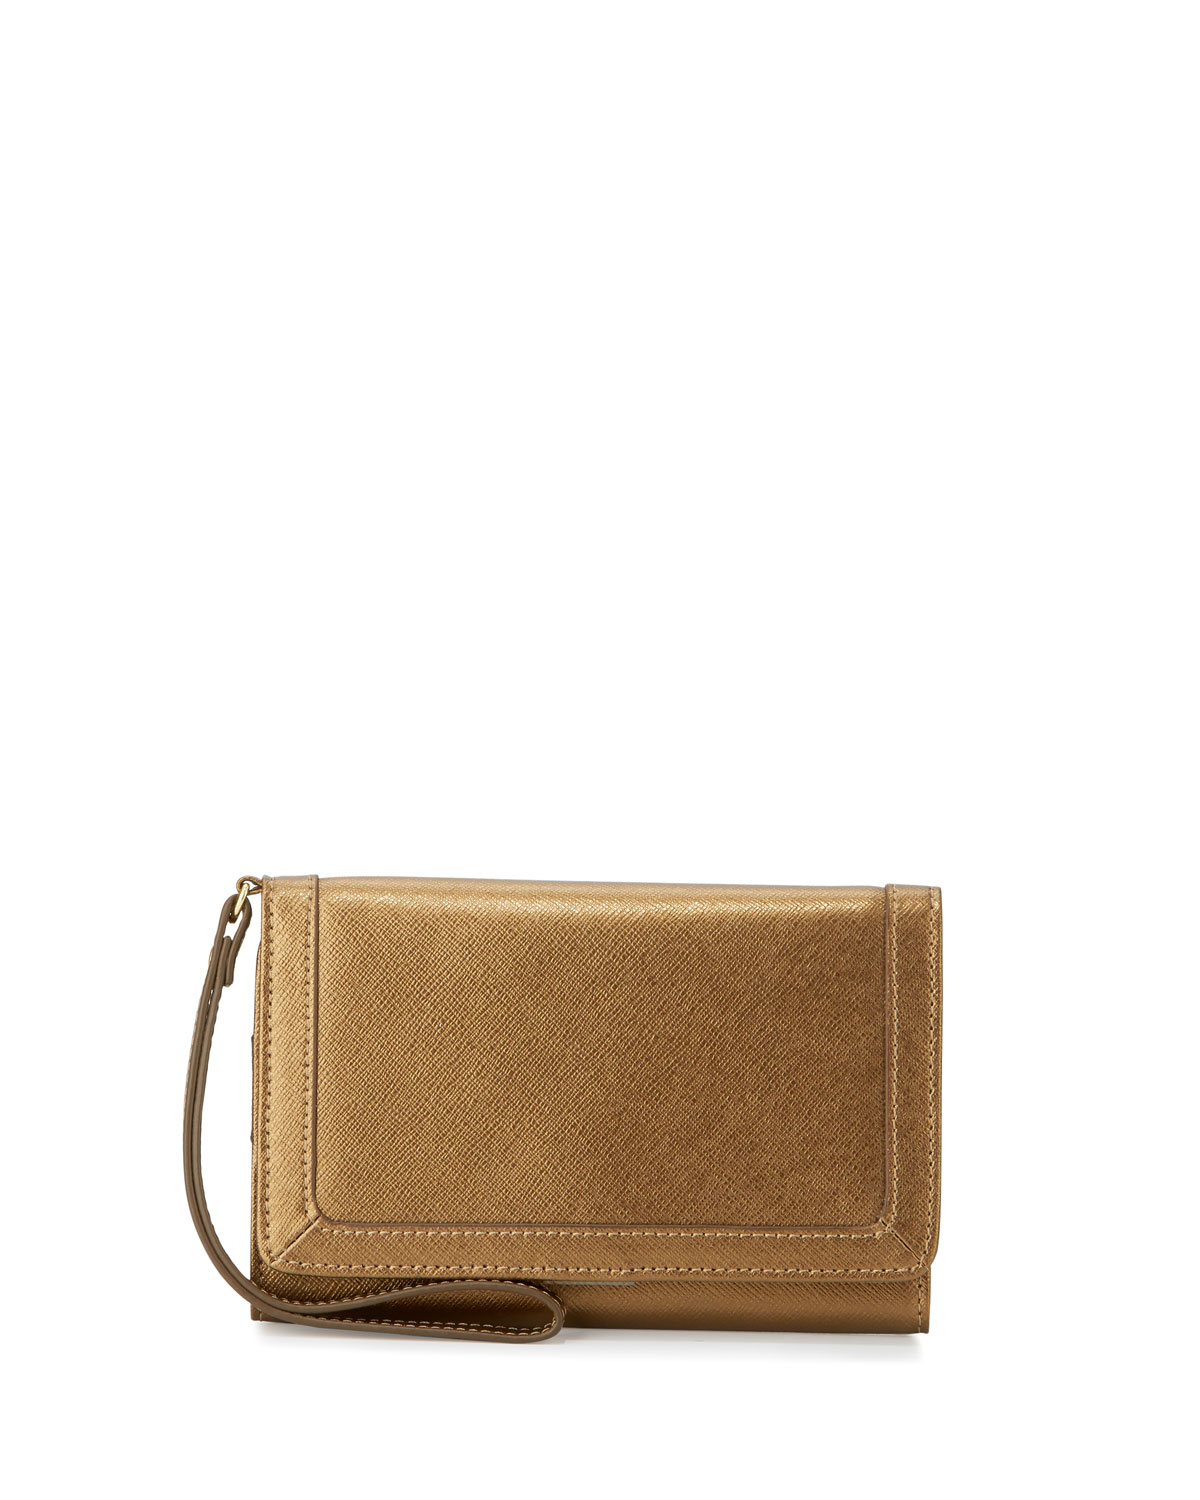 Lyst - Neiman Marcus Leather Cell Phone Wristlet Wallet in Metallic